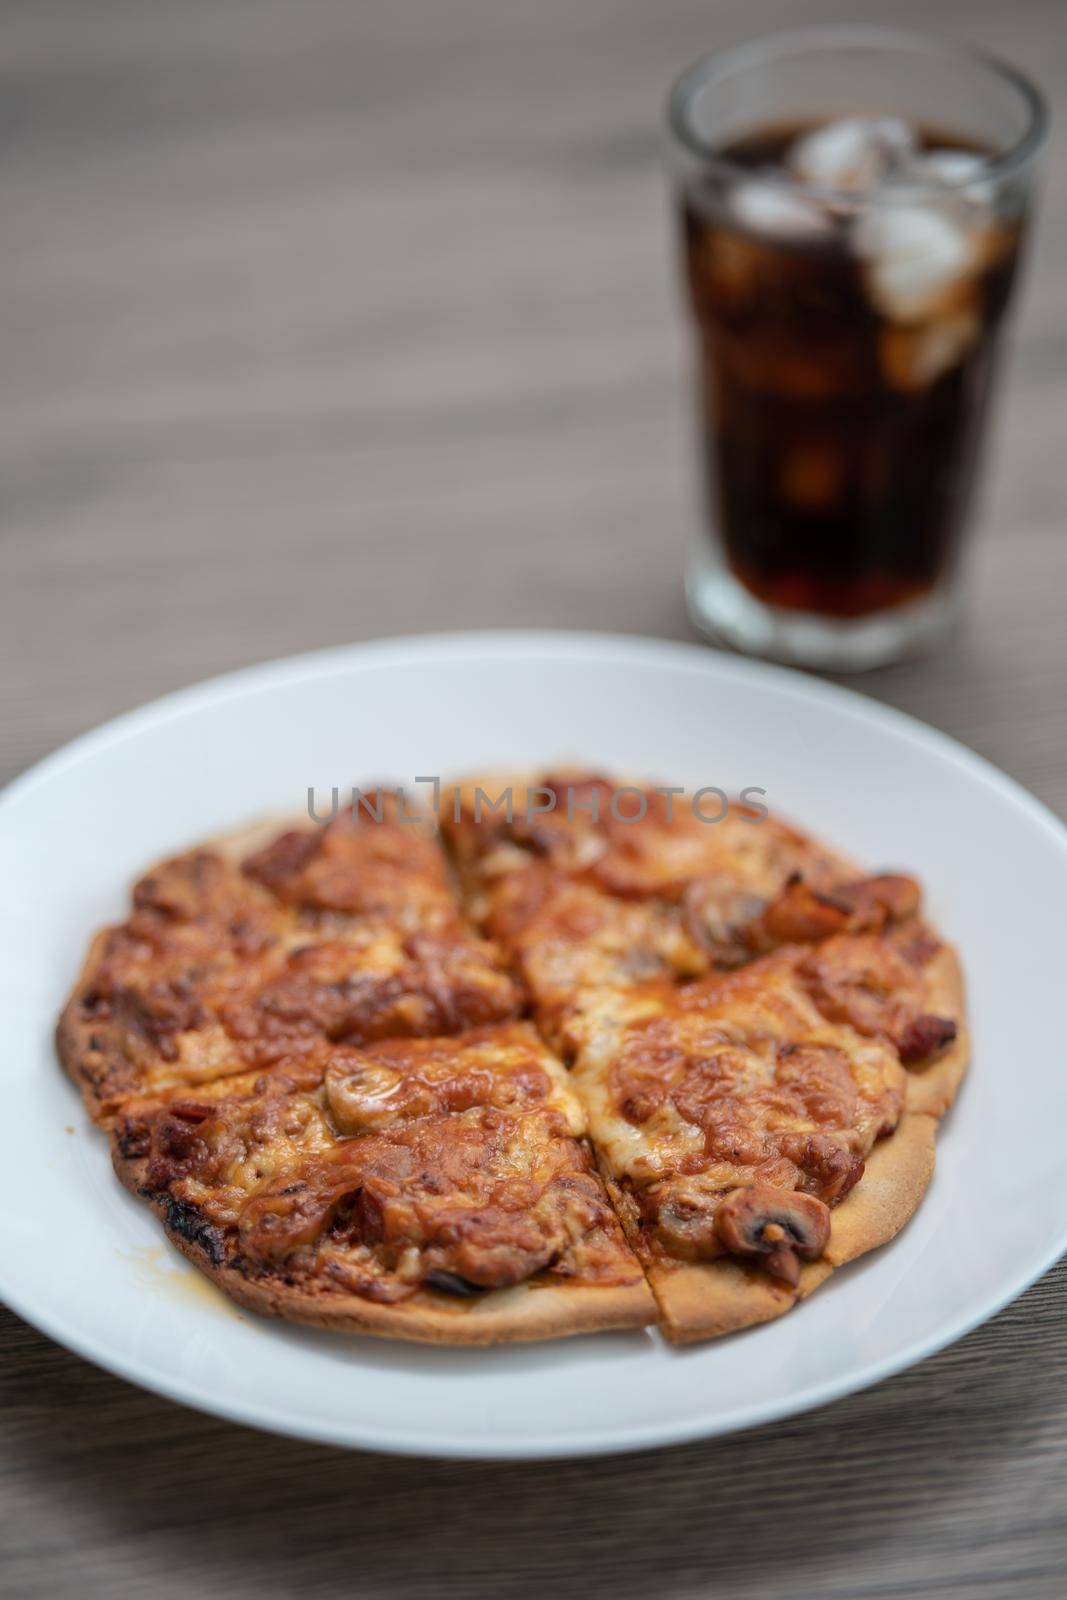 Black burned baked homemade pizza with glass of soft drink.